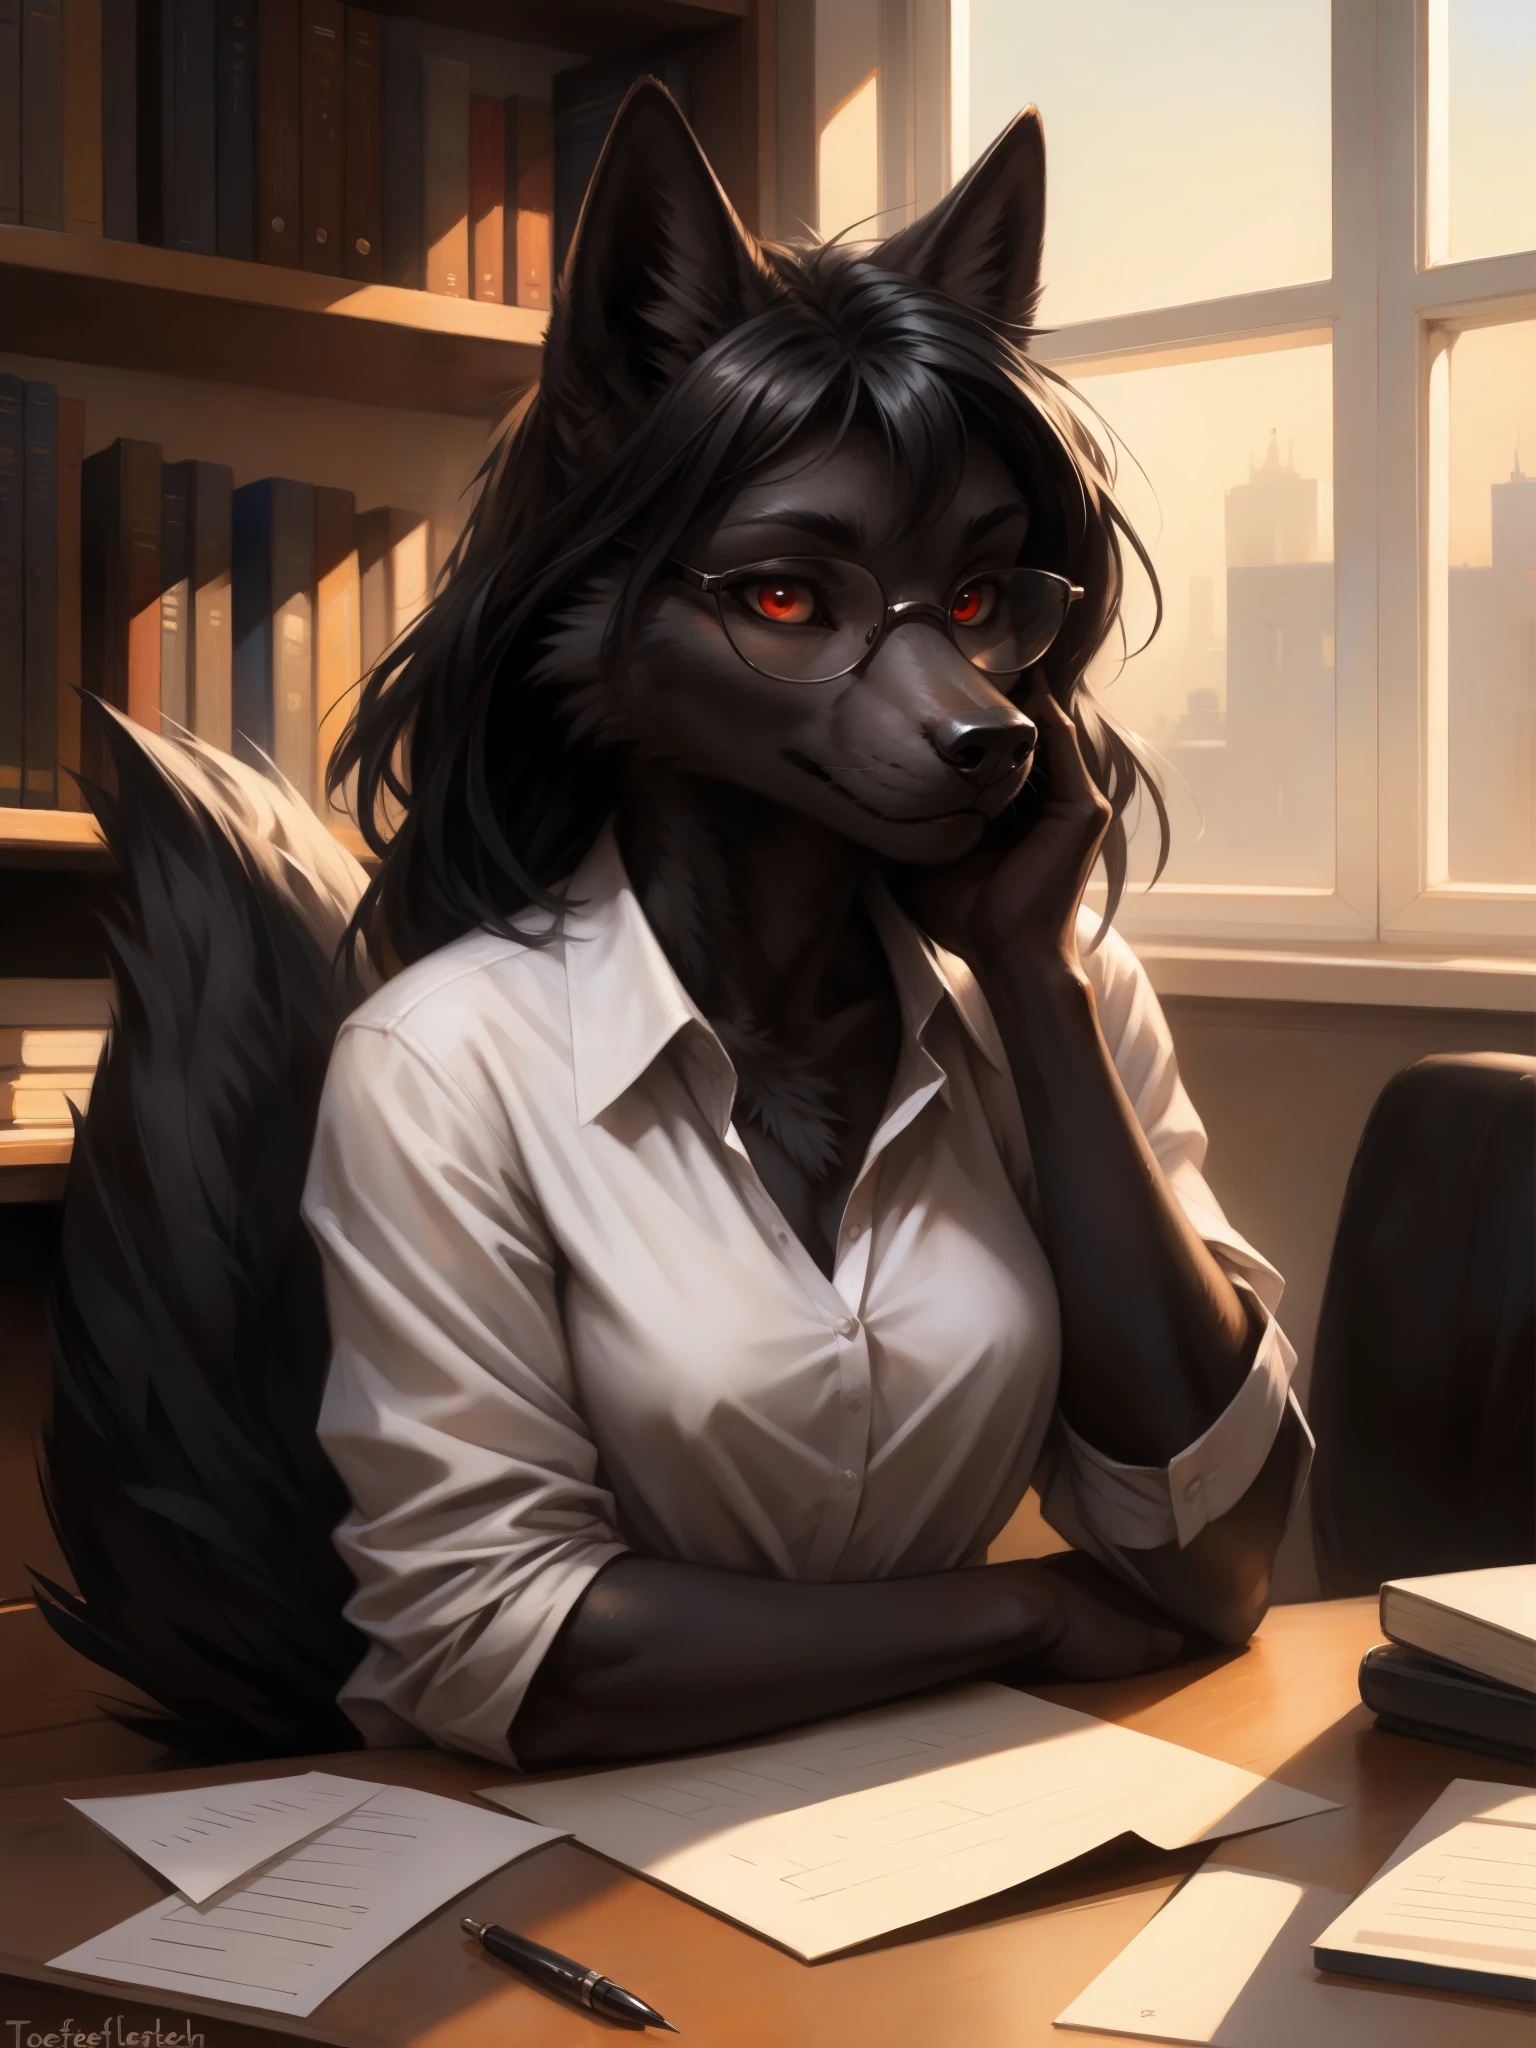 by kenket, by totesfleisch8, (by thebigslick, by silverfox5213:0.8), (by syuro:0.2), a dark grey wolf, female, red eyes, white sclera, black wolf ears, long black hair, straight black bangs, cute snout, black nose, black wolf tail, wearing white button up shirt, black skirt, black leggings, elegant glasses, serious expression, sitting, behind a teachers desk, in an office, leaning on her desk, one hand on her face, holding a pen writing on a piece of paper